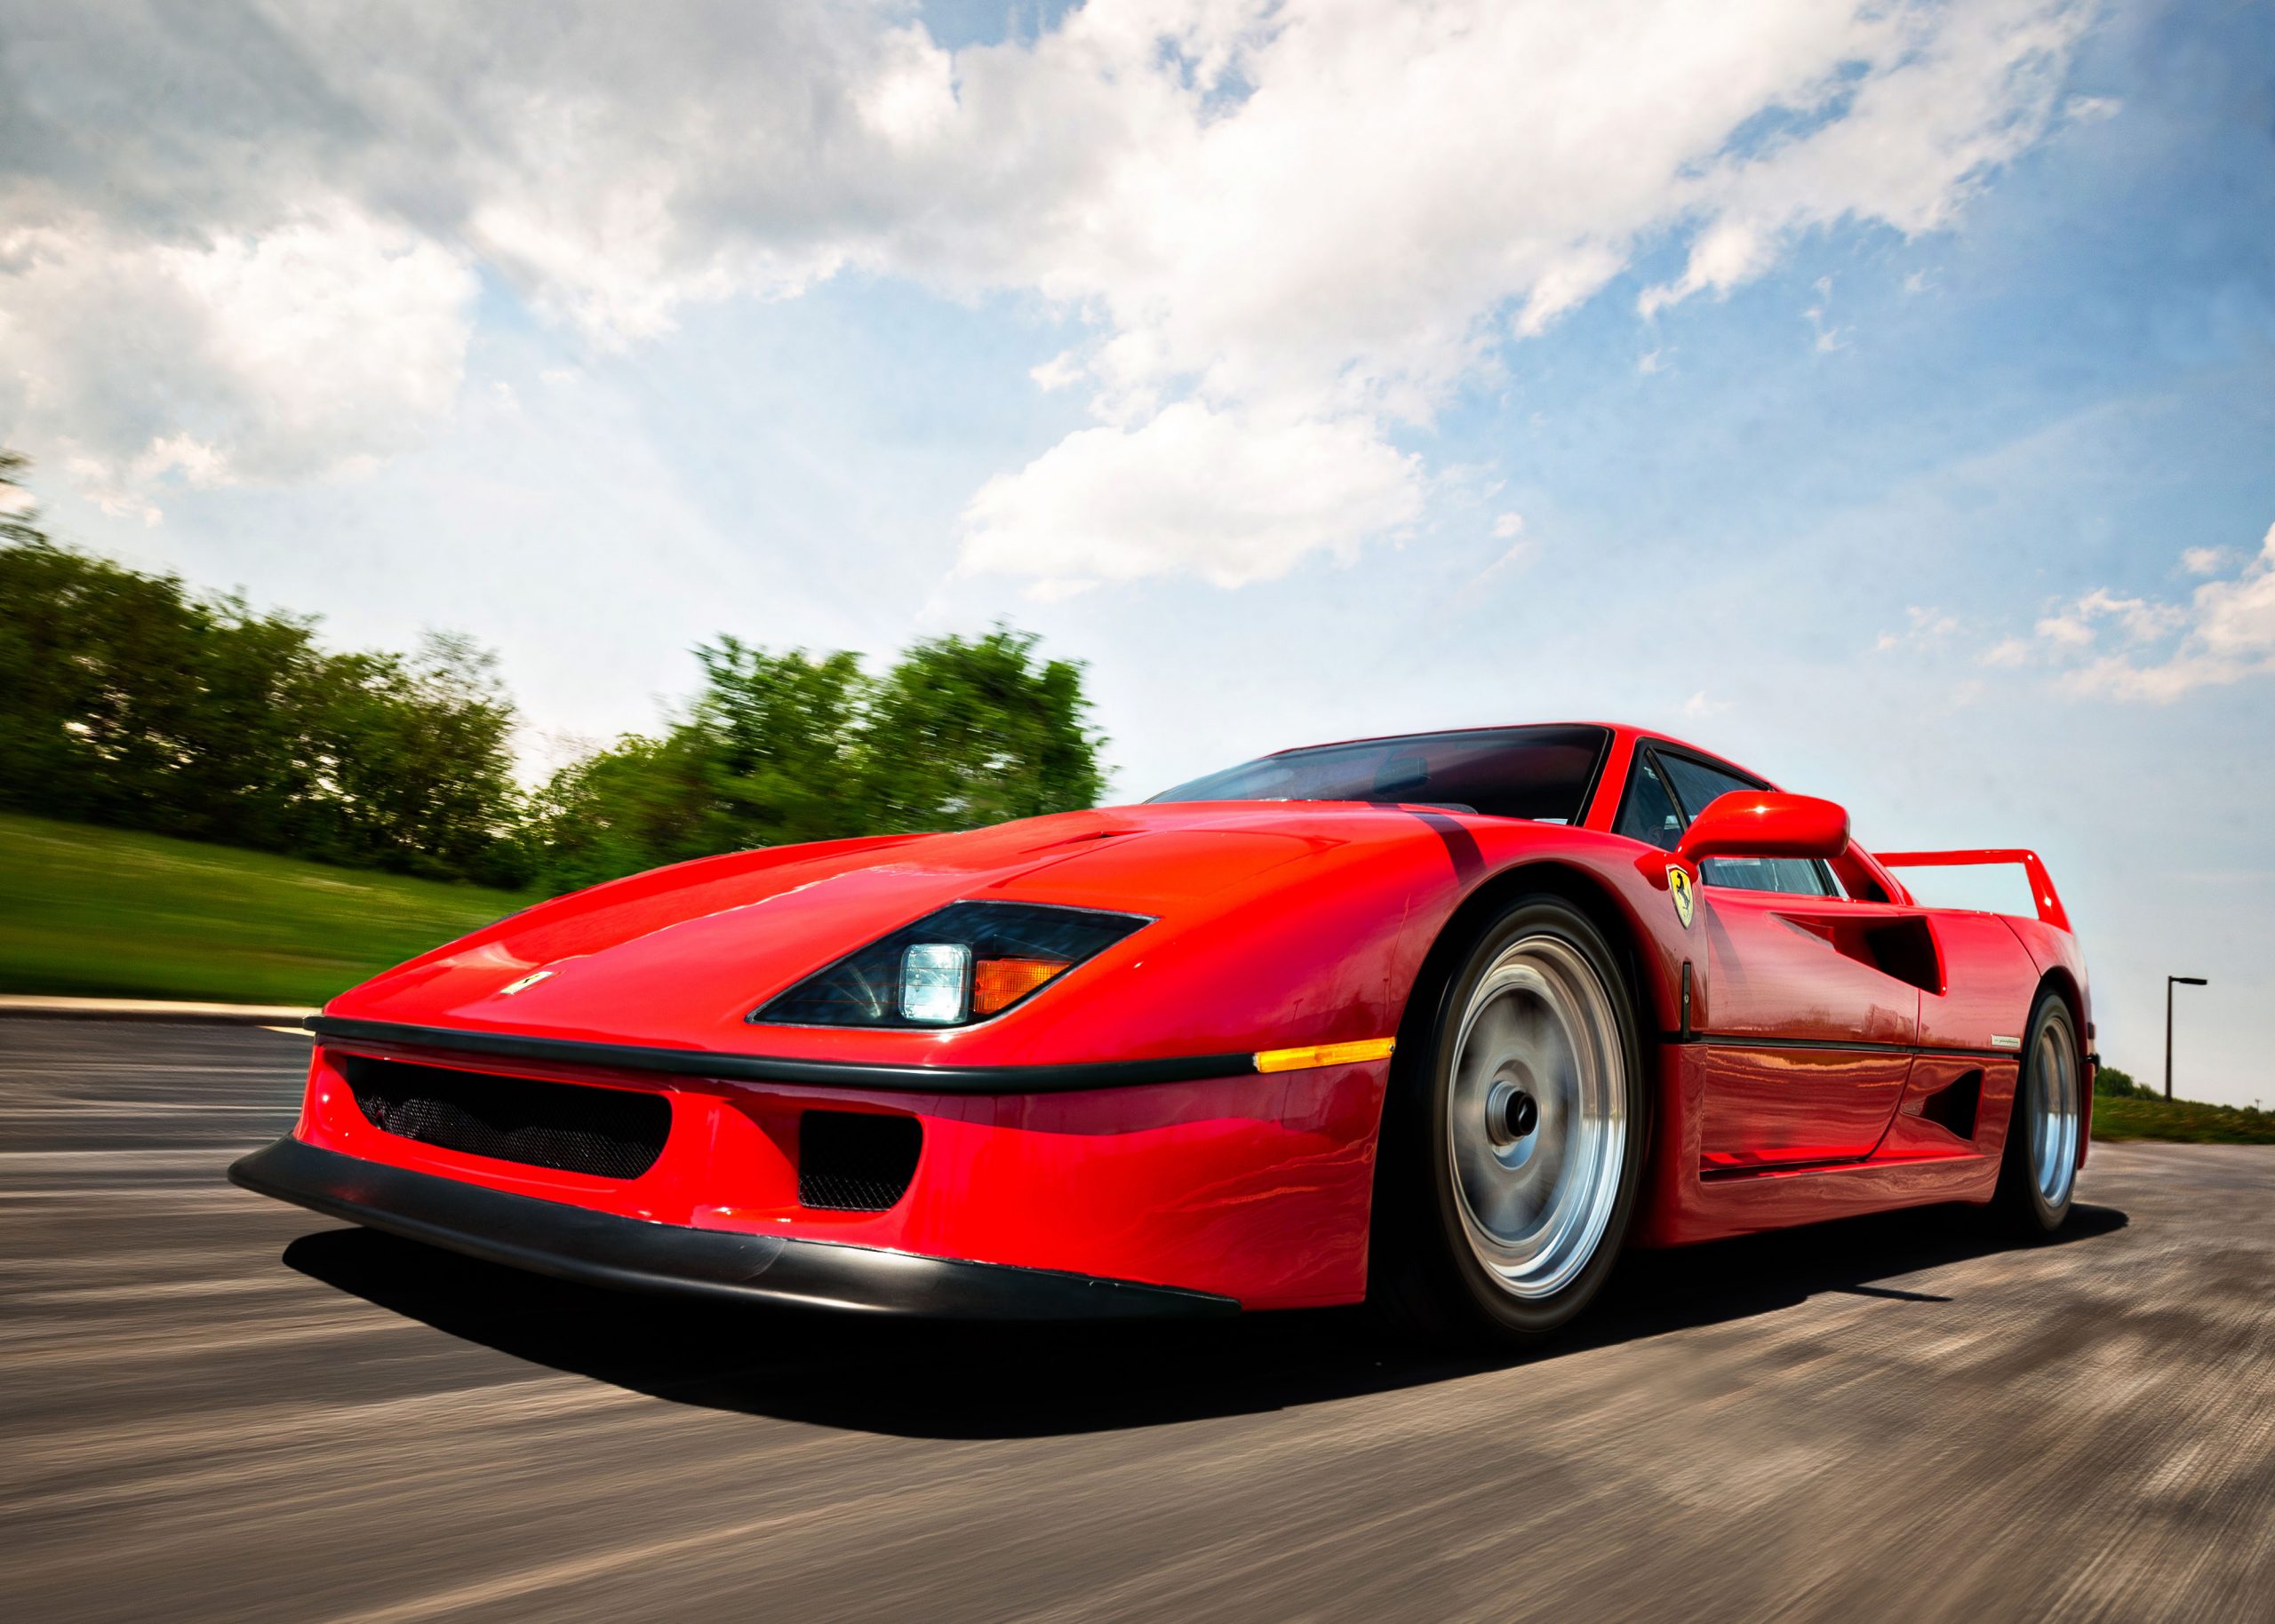 2021 was the year of the F40